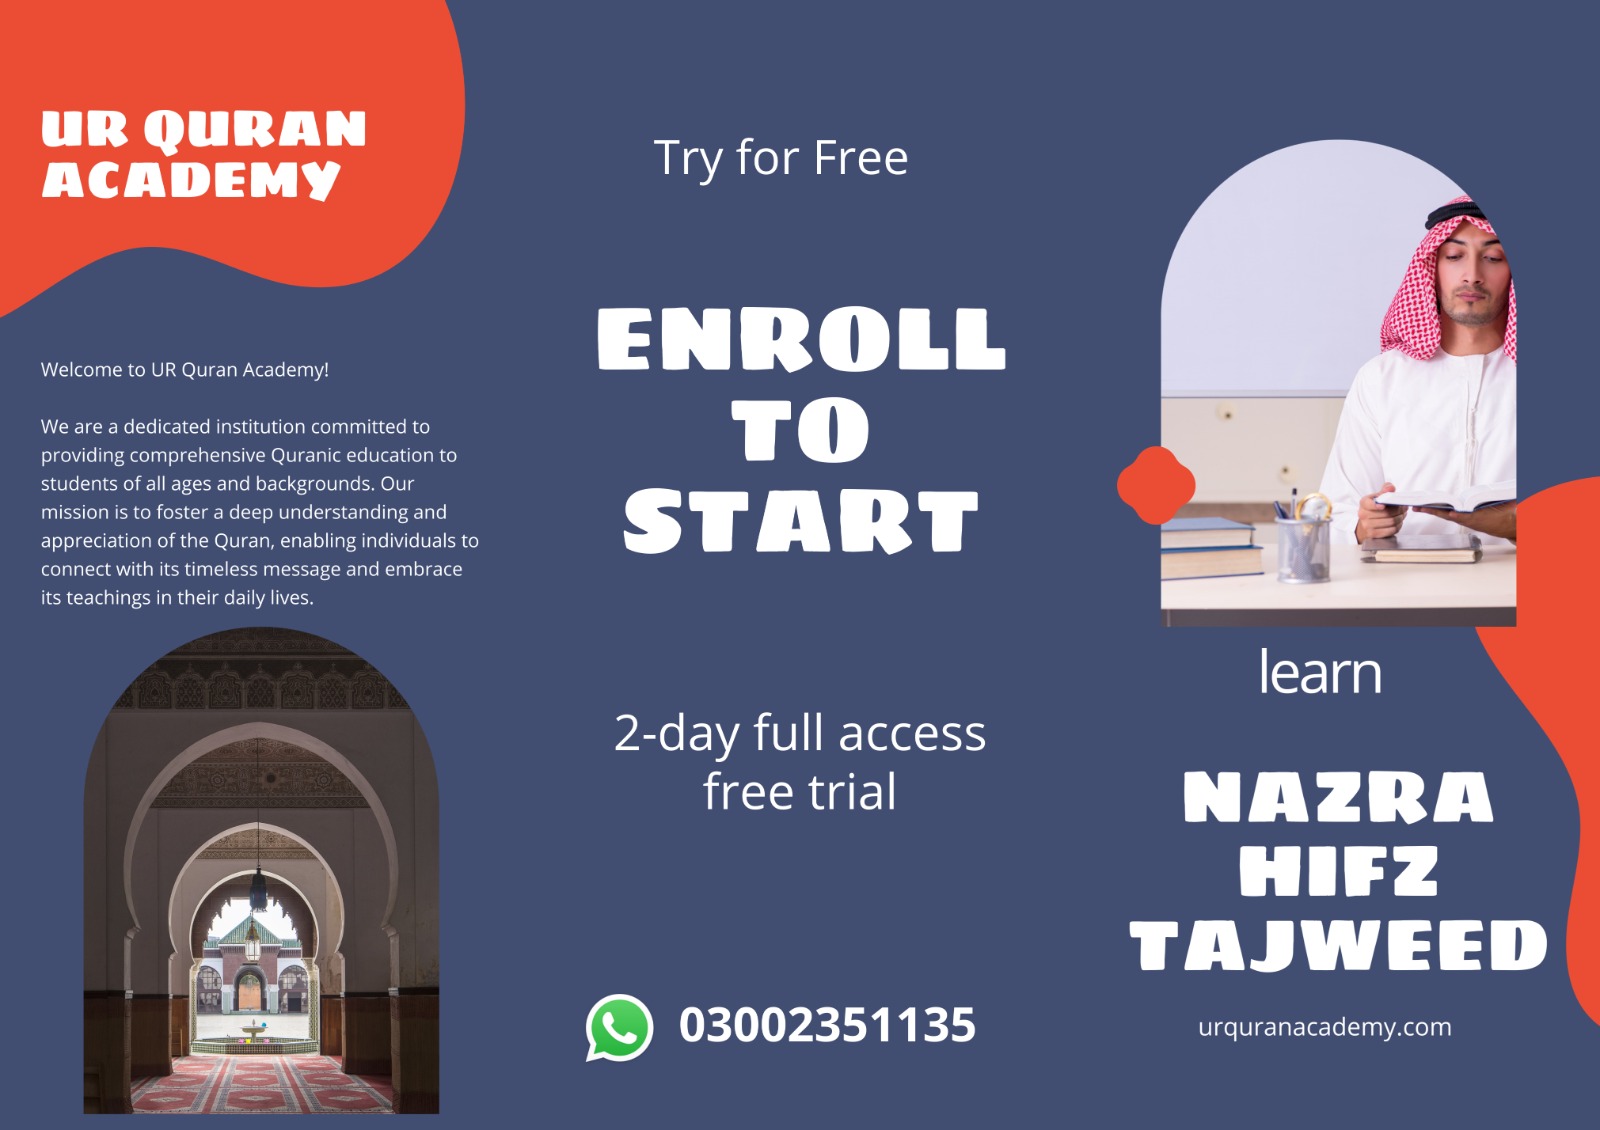 OLTTTY.T
ACADEMY

Welcome to UR Quran Academy!

We are a dedicated institution committed to
providing comprehensive Qui L&amp;R
students of all ages and back Our
mission is to foster a deep understanding and

 
 

appreciation of the Quran, enabling individuals to

connect with its timeless message and embrace
its teachings in their daily lives.

 

Try for Free

ENROLL
|
START

2-day full access
free trial

(© 03002351135

 

x11

LJ. F419.)
LL] |r
Ly vl.)

urquranacademy.com